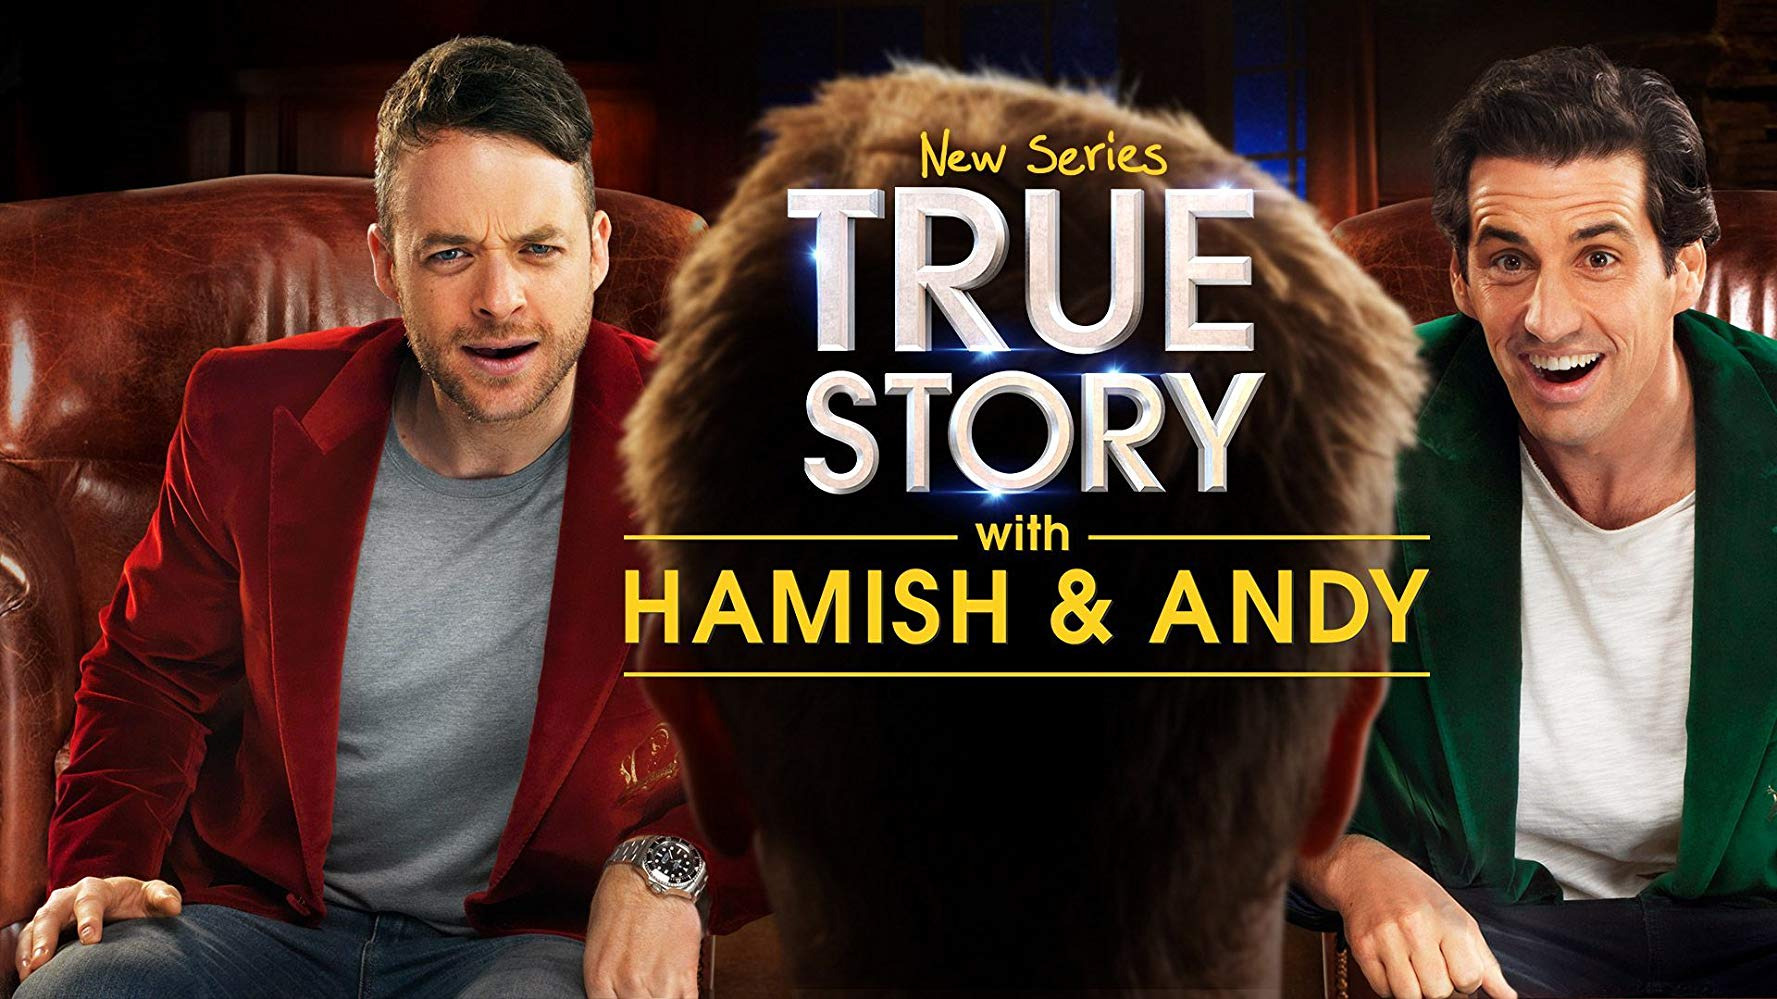 Show True Story with Hamish & Andy